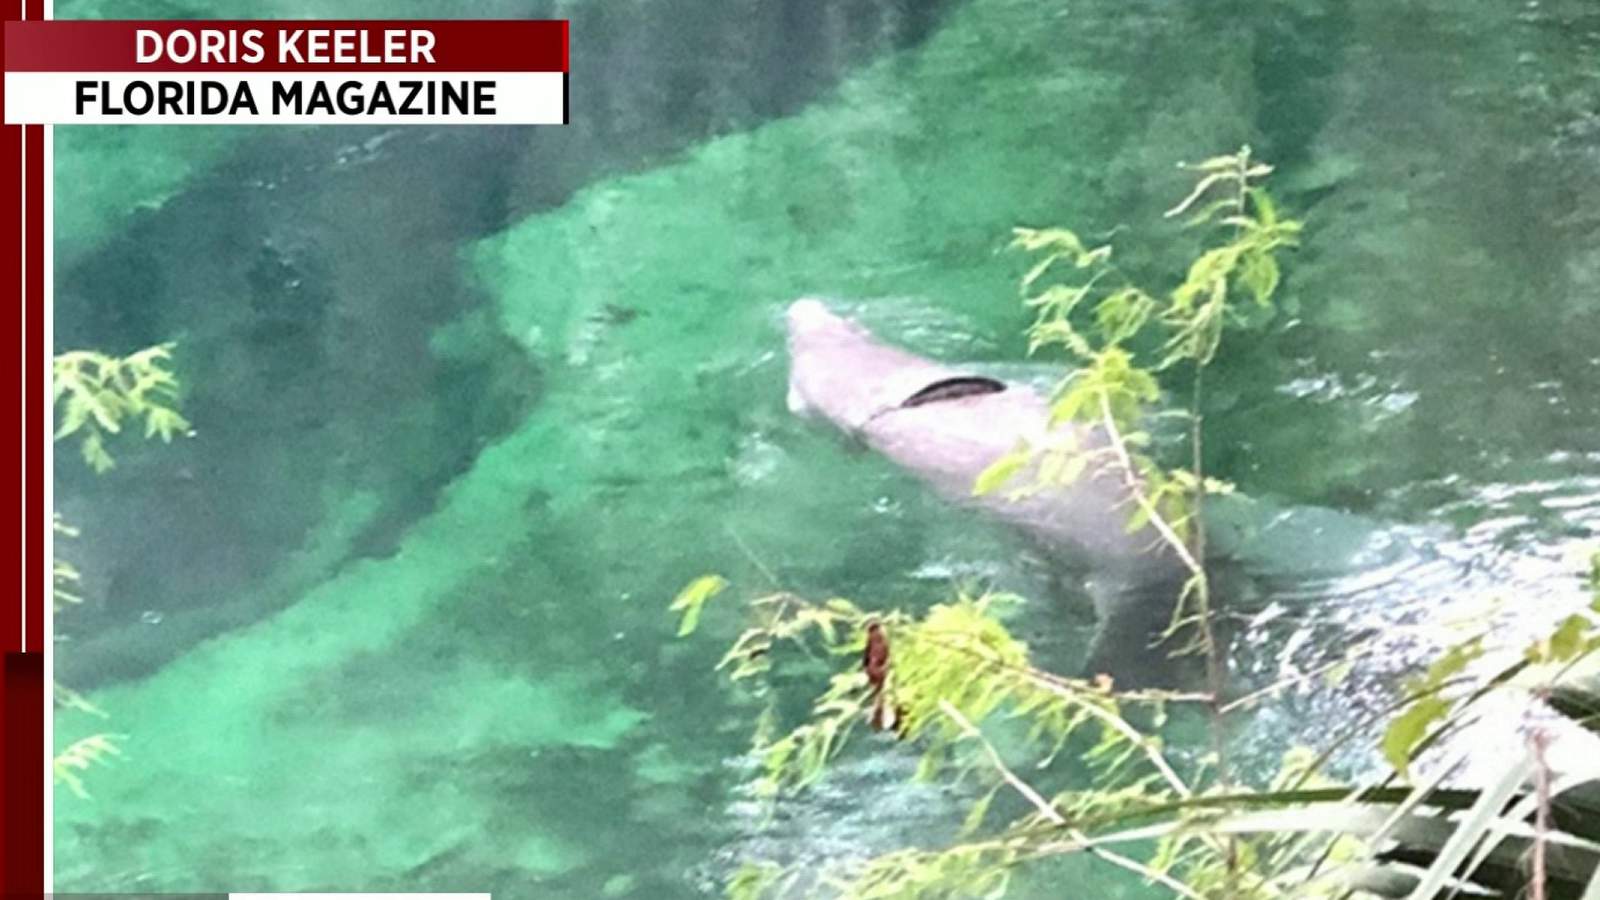 Crews work to rescue manatee with tire stuck around its belly